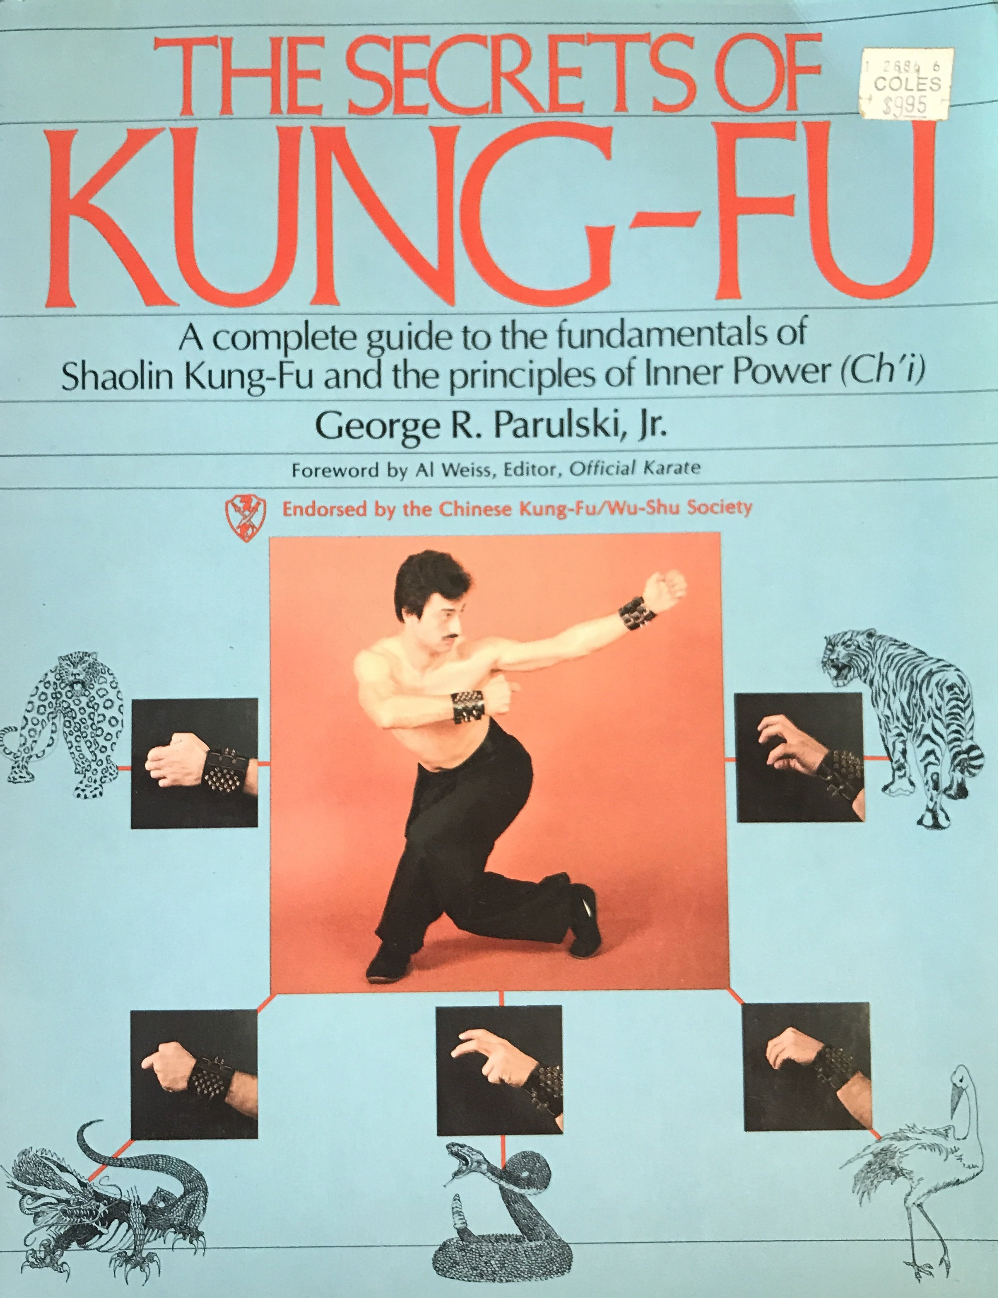 The Secrets of Kung-Fu: A Complete Guide to the Fundamentals of Shaolin Kung-Fu and the Principles of Inner Power Book by George Parulski (Preowned) - Budovideos Inc